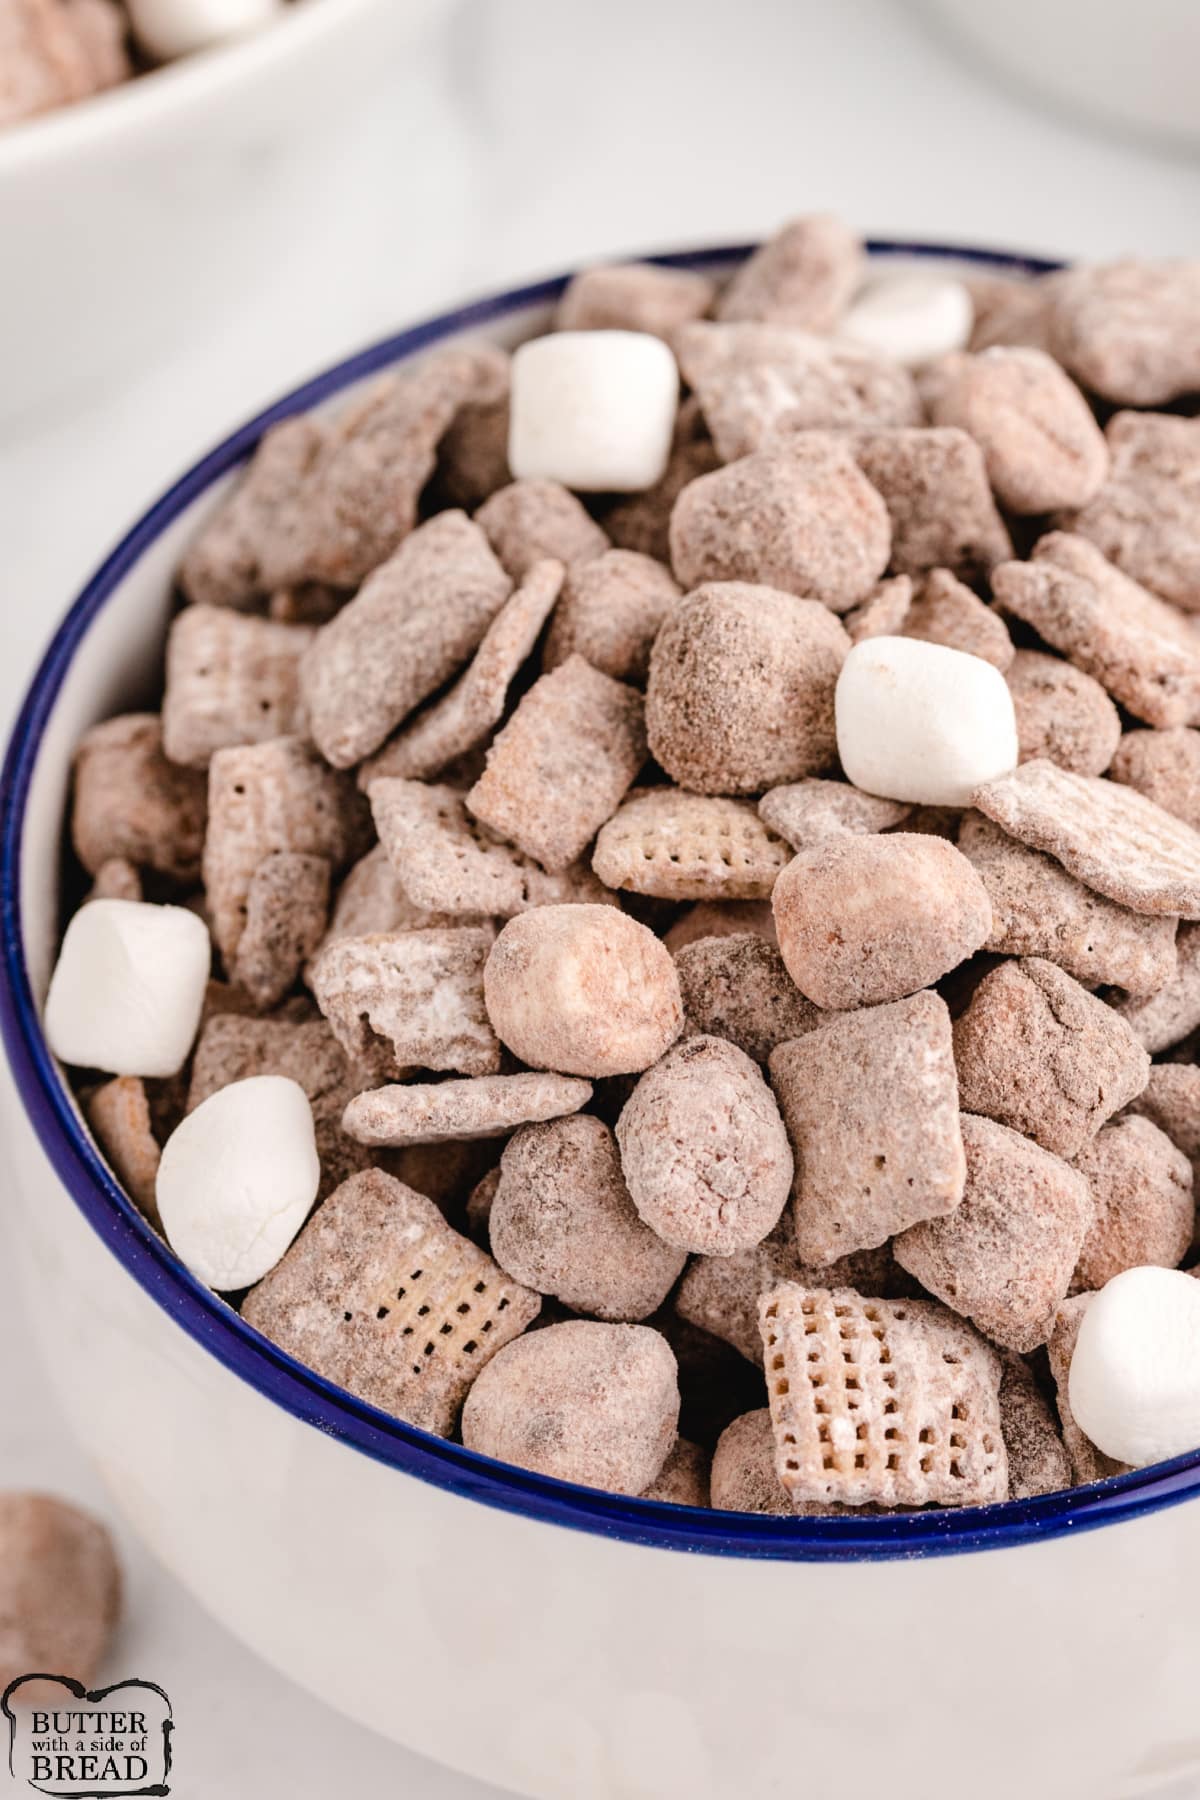 Hot Chocolate Snack Mix is made with Chex cereal, hot chocolate mix, marshmallows, and graham crackers! A fun variation on the traditional muddy buddies recipe. 